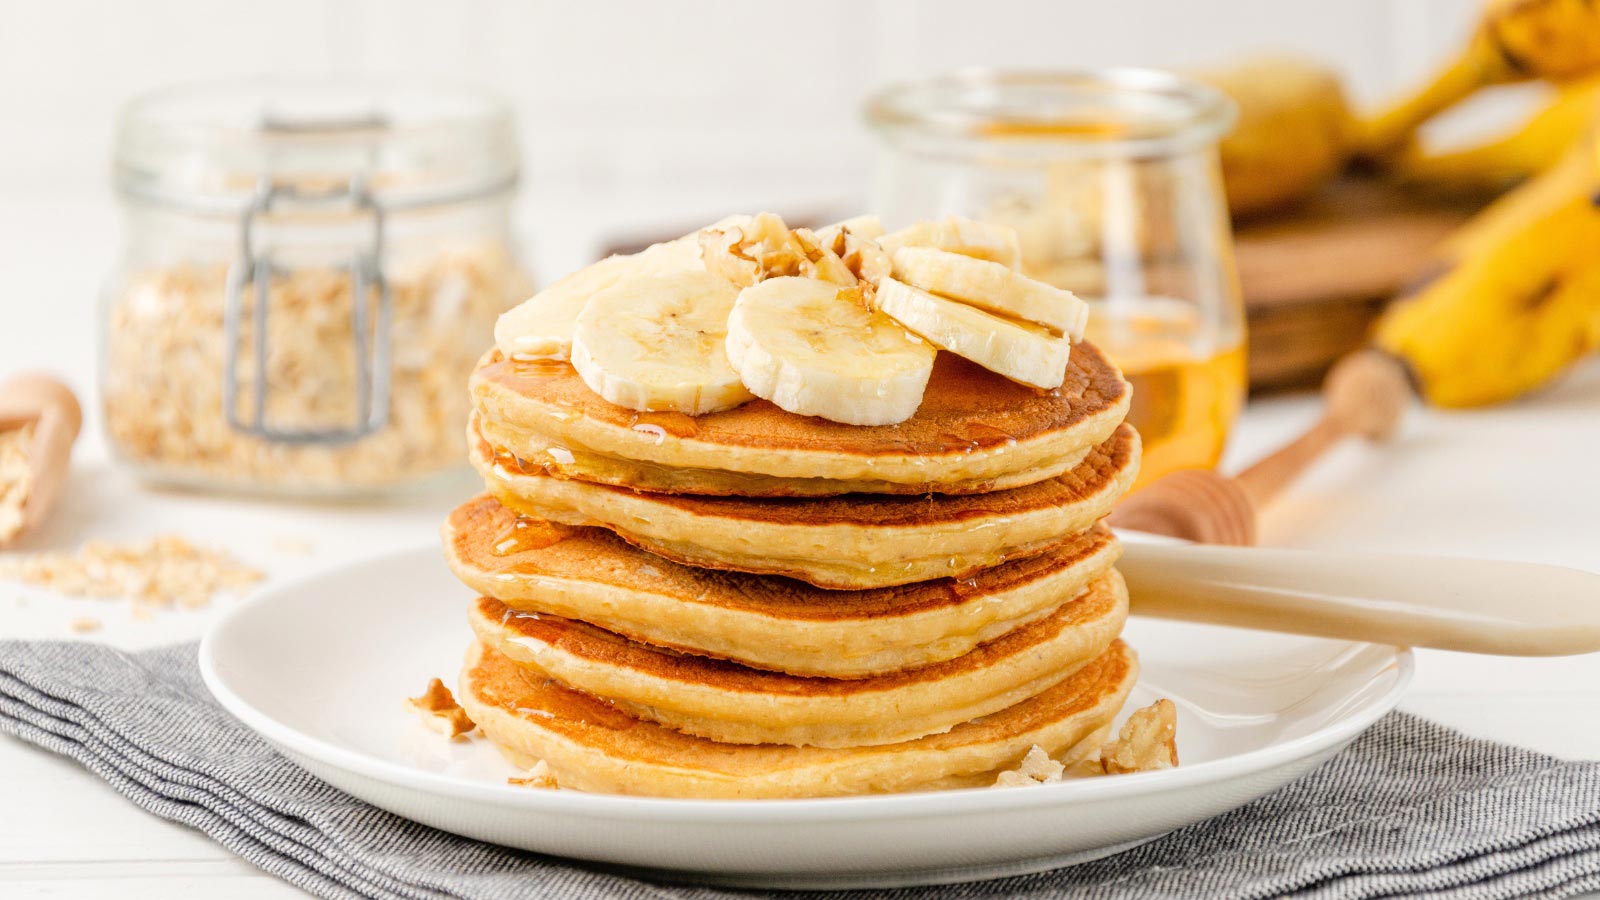 A stack of banana pancakes with slices of fresh bananas, walnuts and honey on top with cup of tea on a white wooden background. A healthy breakfast.